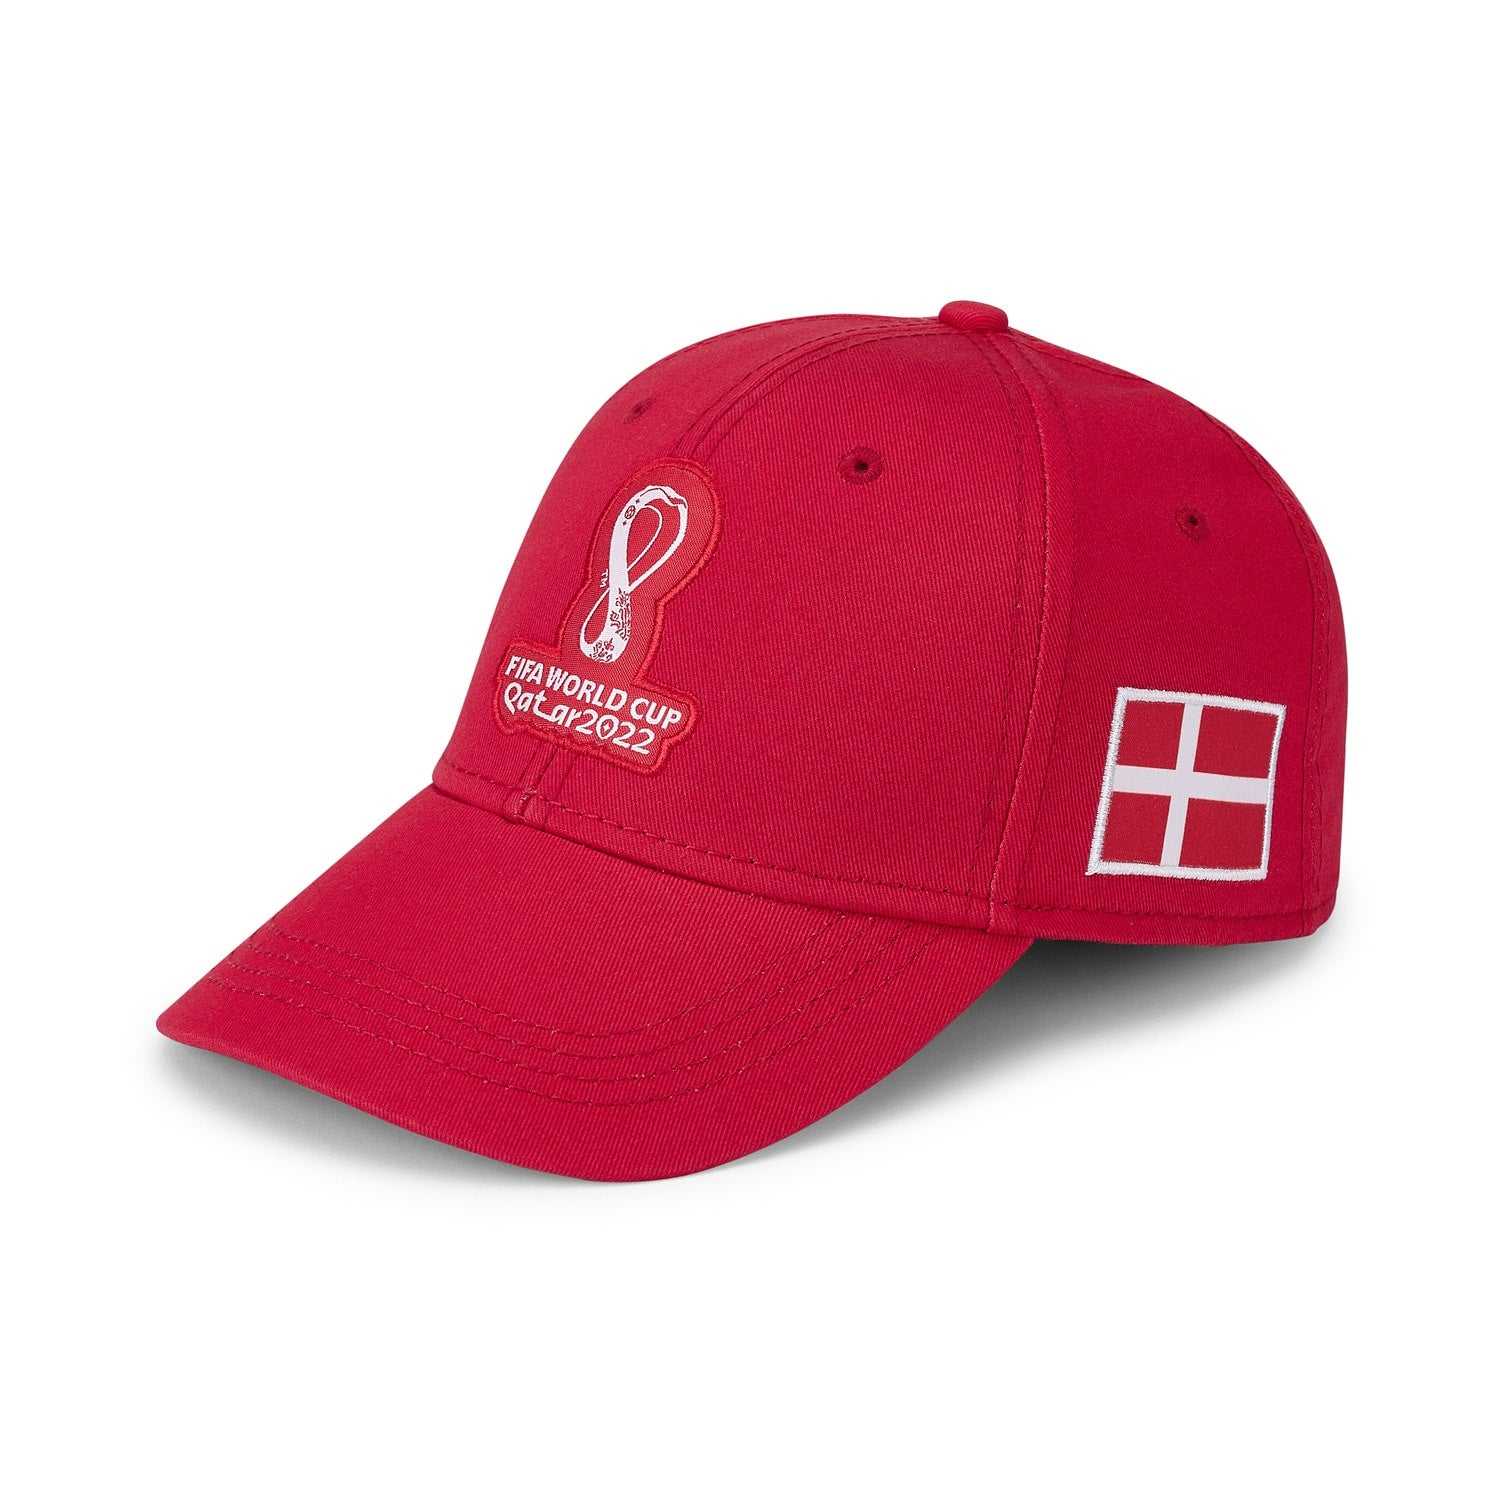 2022 World Cup Denmark Red Cap - Mens